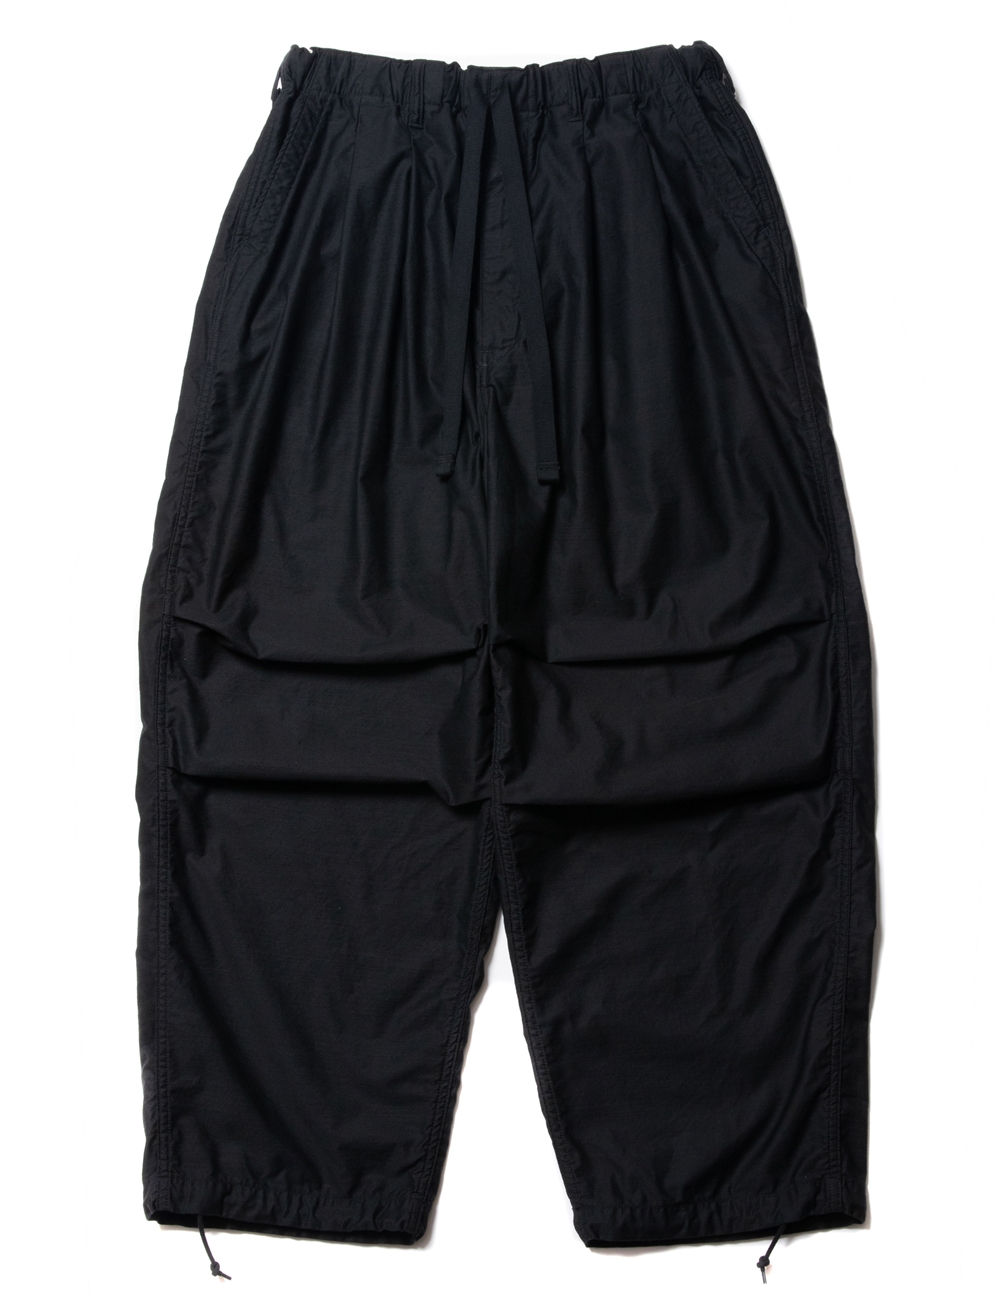 COOTIE PRODUCTIONS/Back Satin Error Fit Utility Easy Pants 